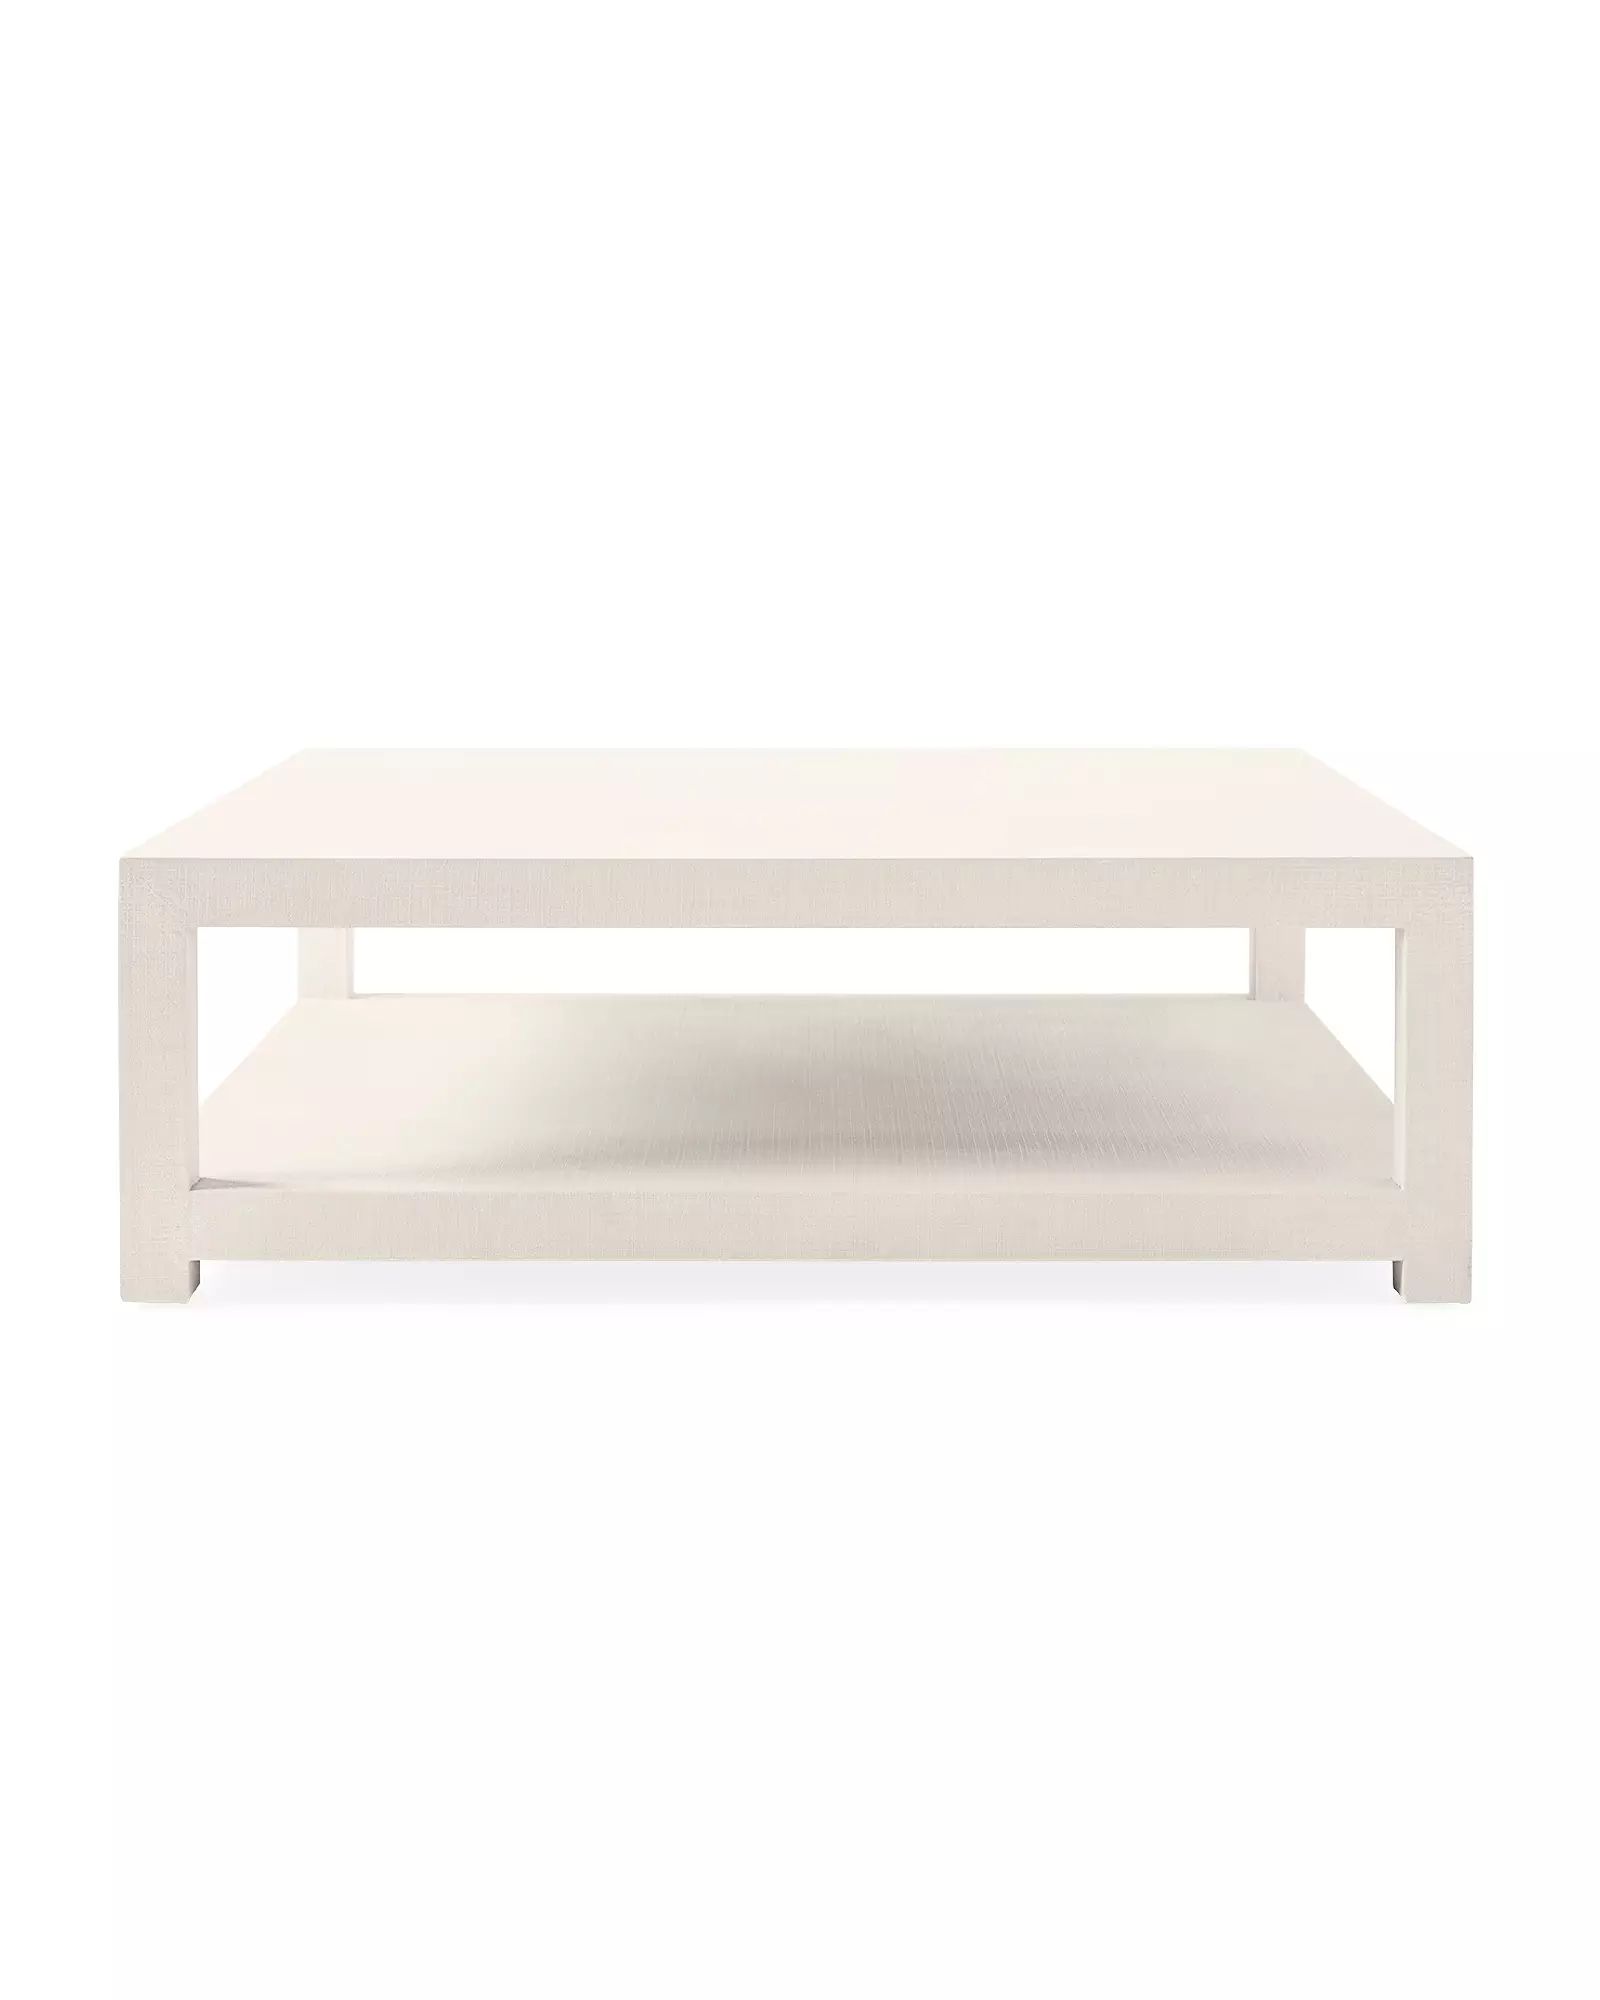 Driftway Coffee Table | Serena and Lily